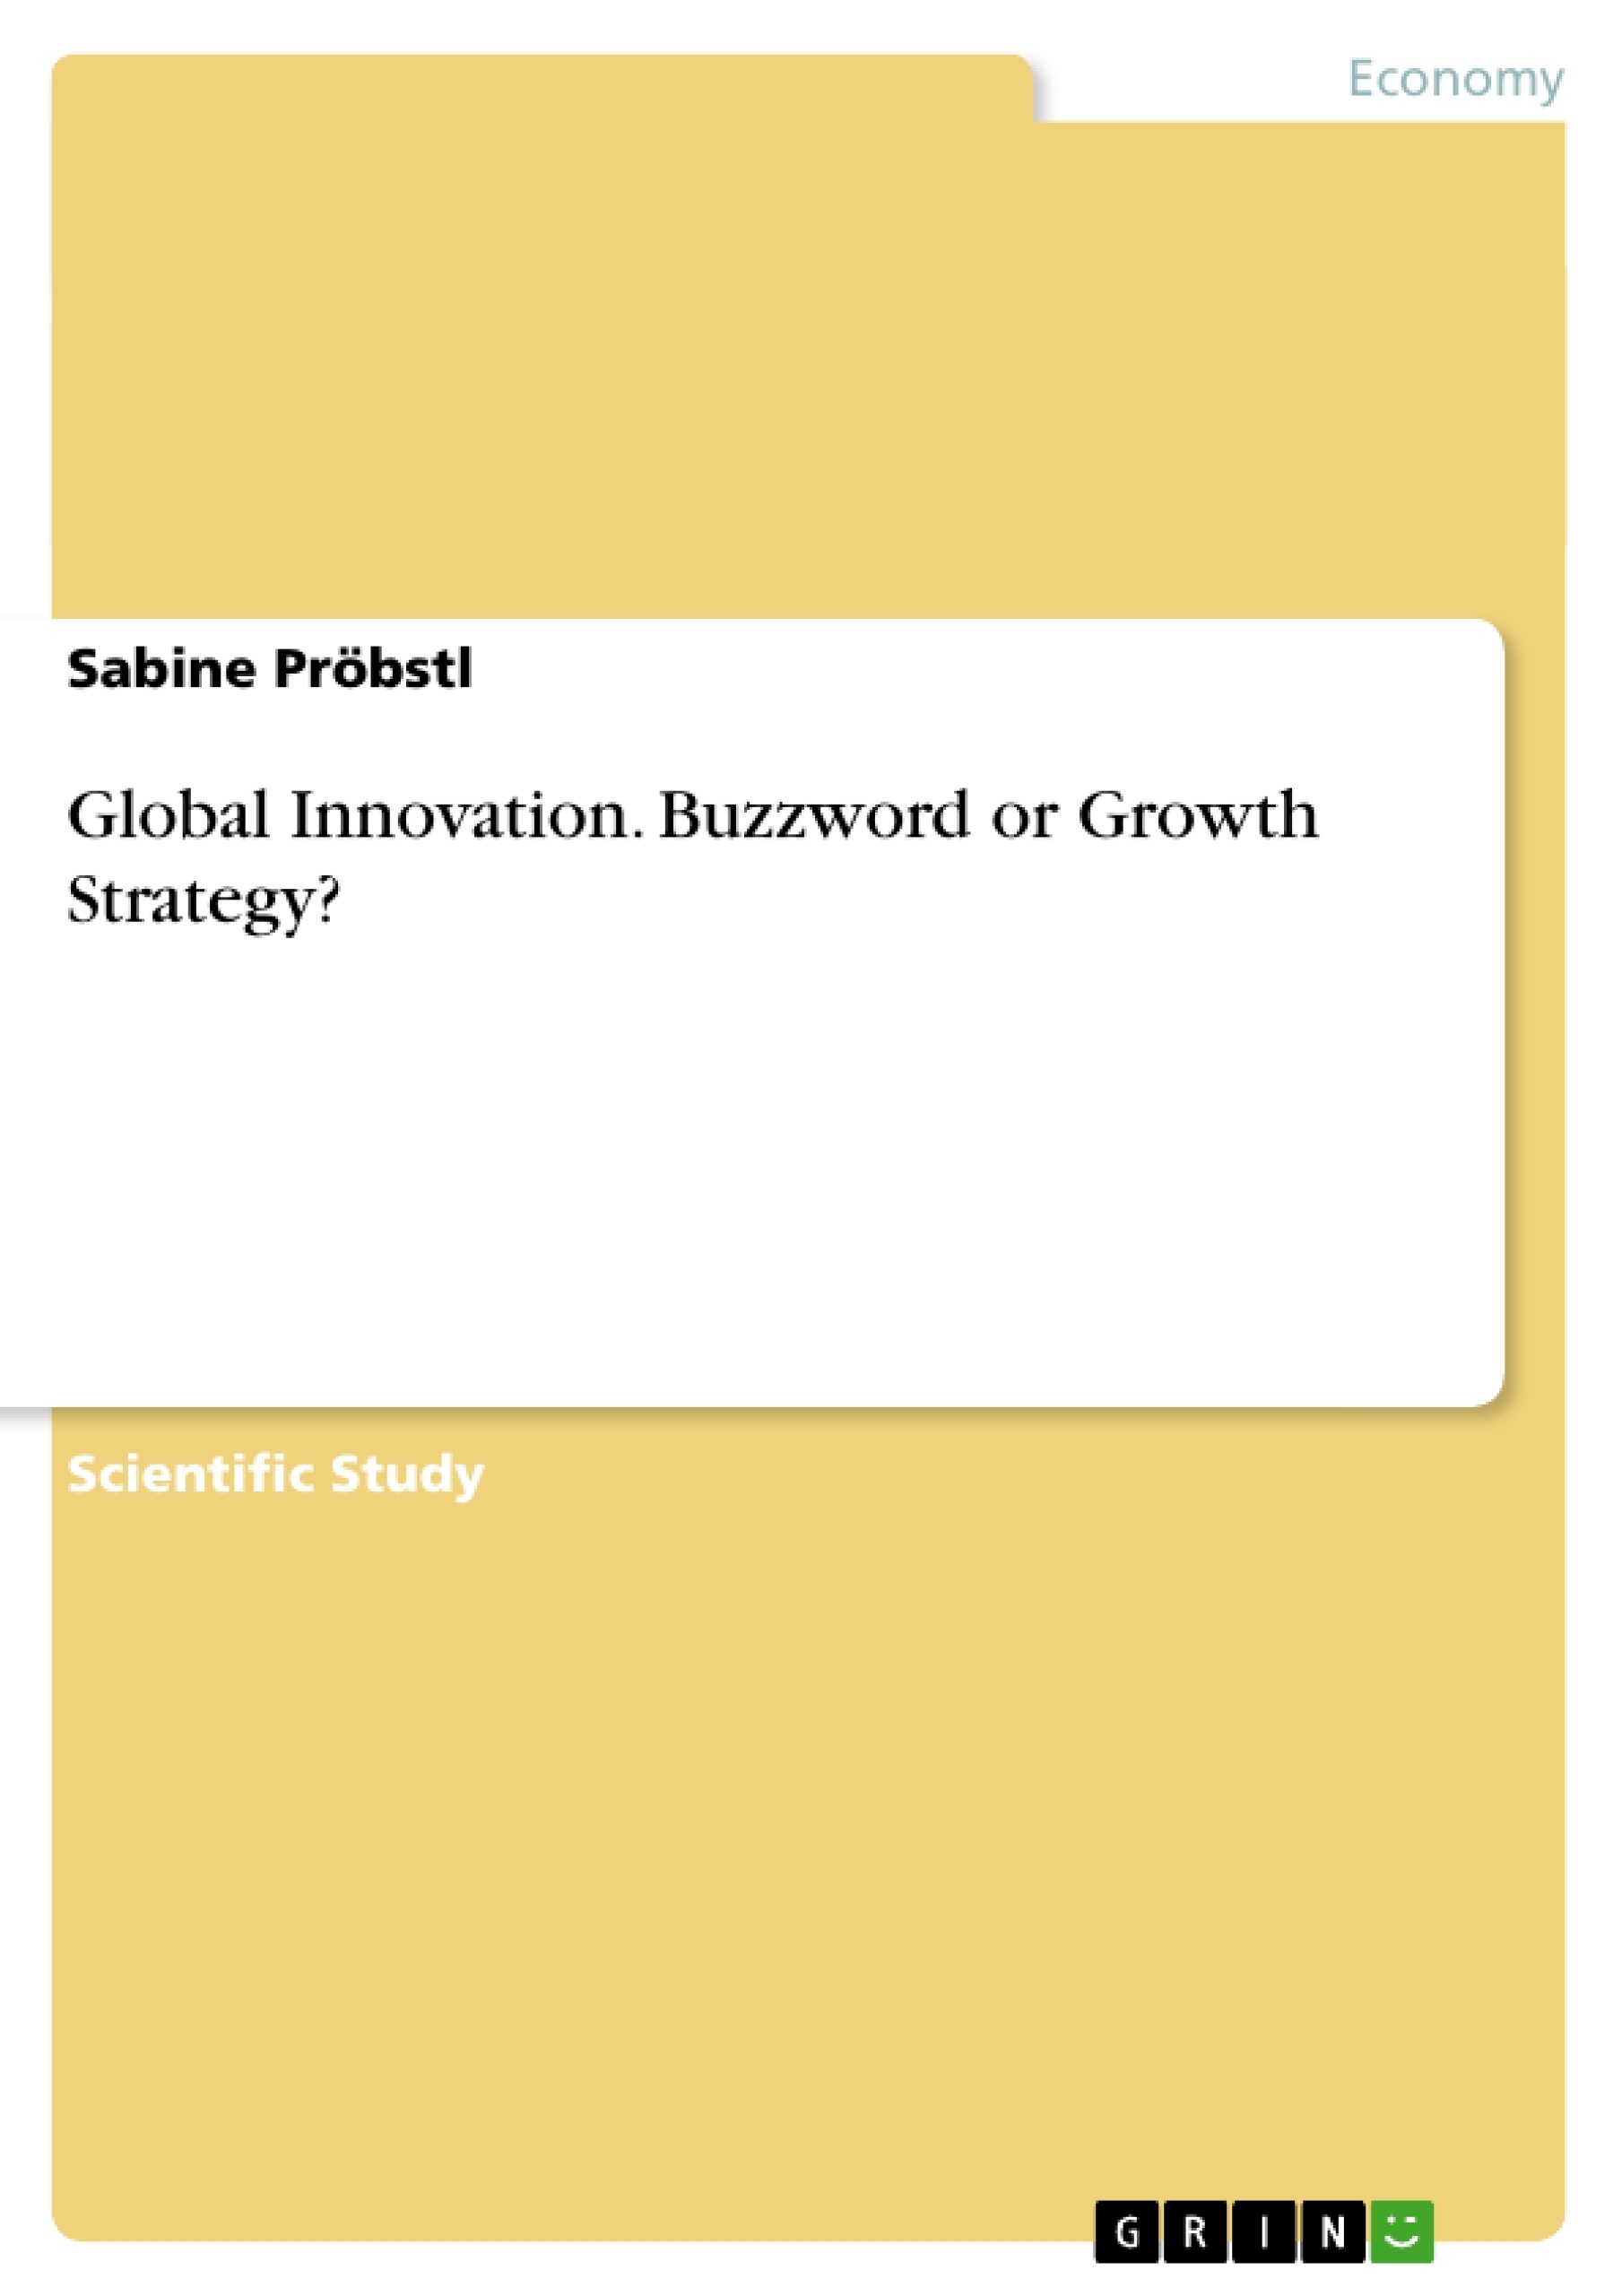 Title: Global Innovation. Buzzword or Growth Strategy?